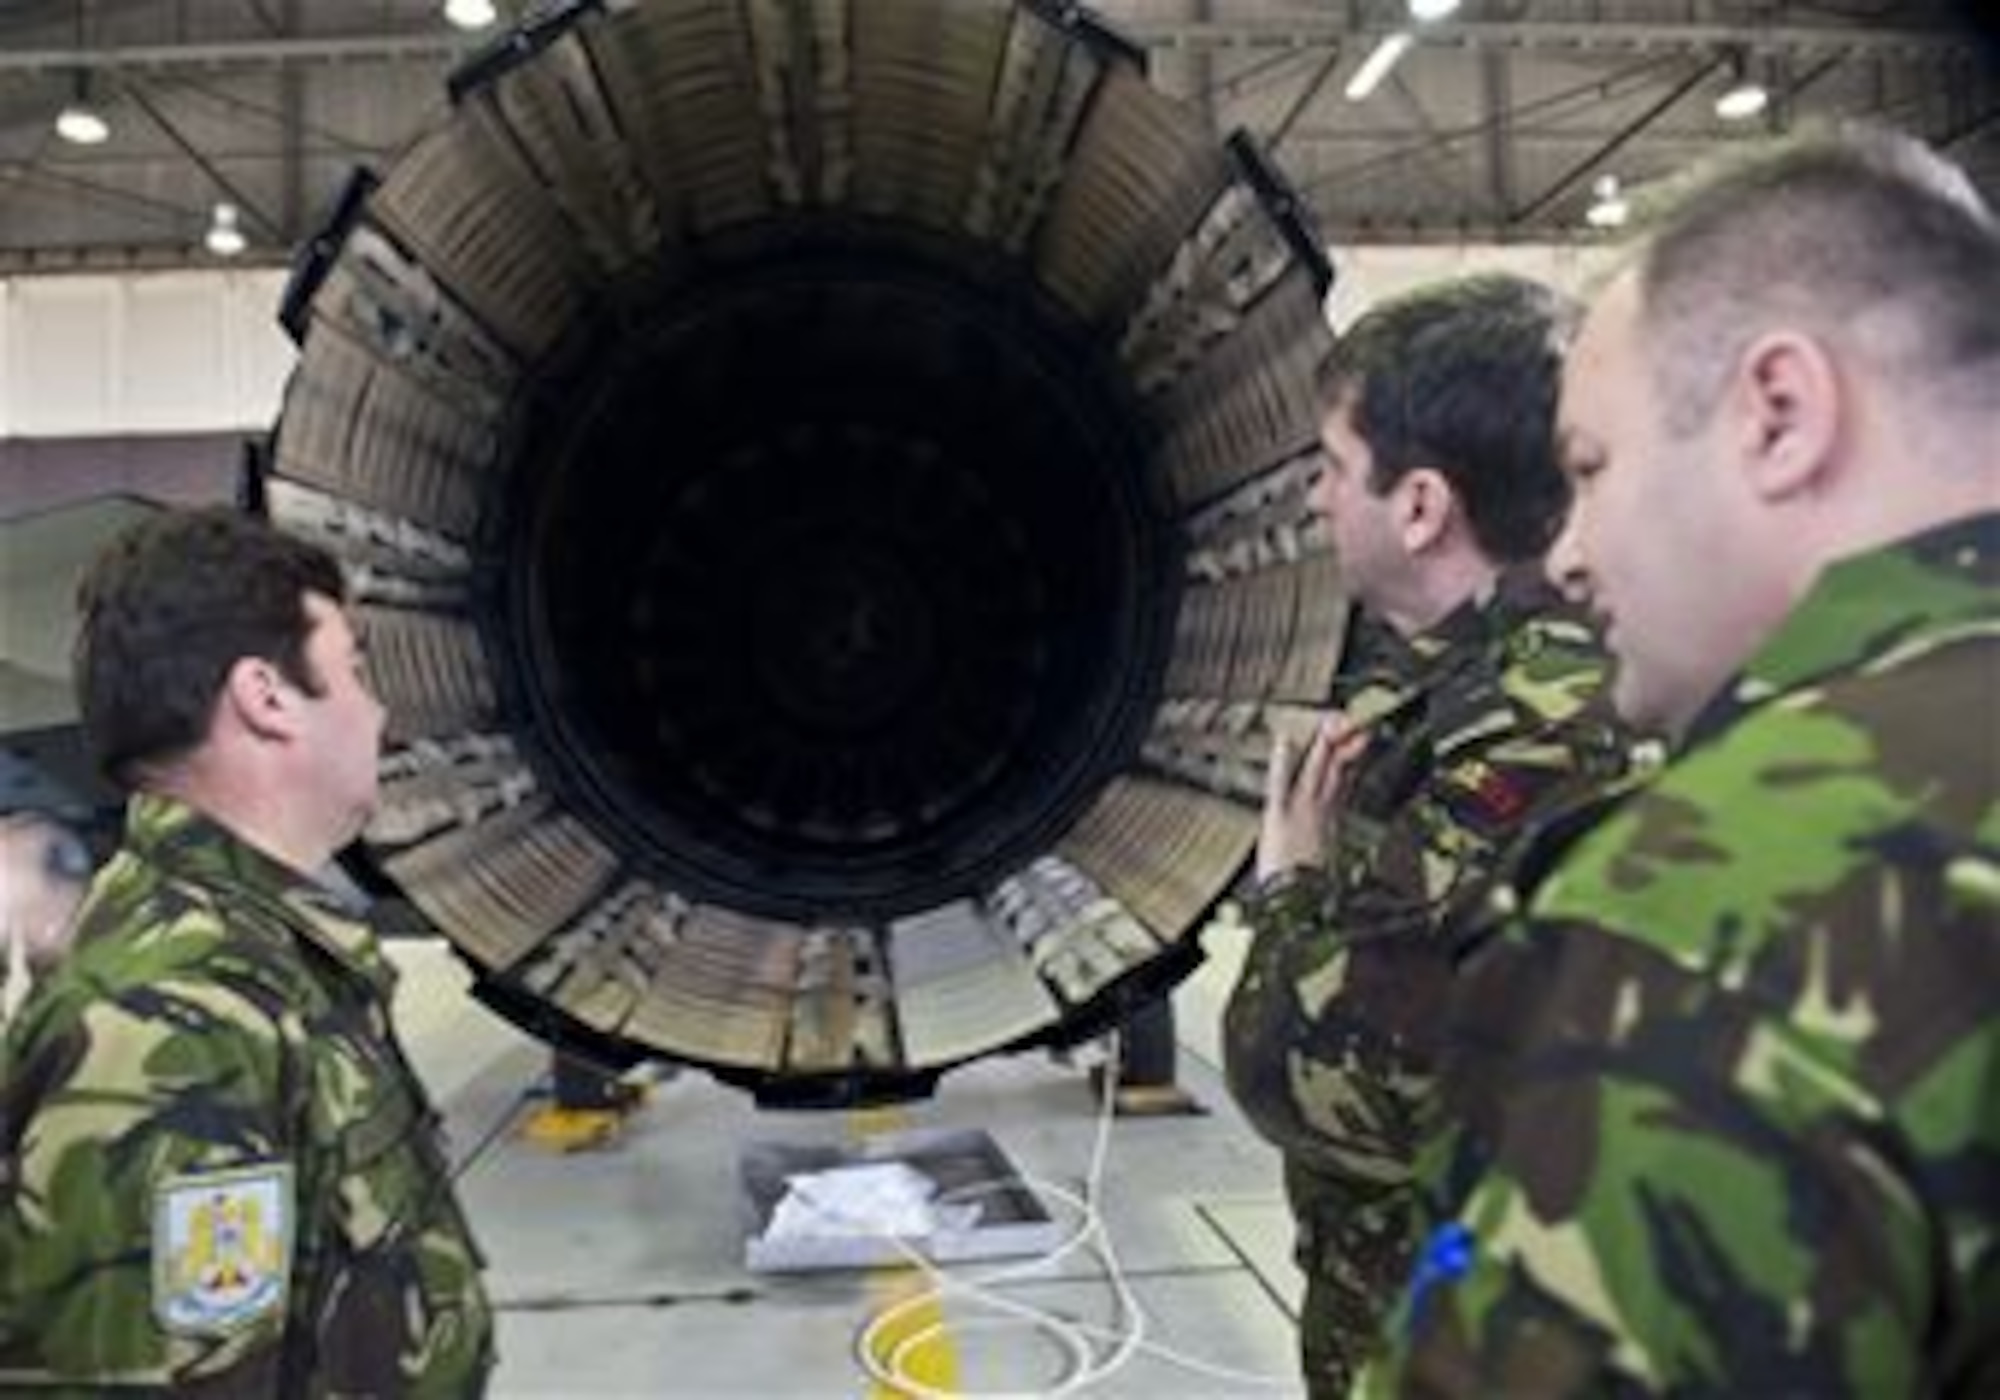 Romanian air force members examine the engine exhaust nozzle of an F-16 Fighting Falcon fighter aircraft during a familiarization tour at Spangdahlem Air Base, Germany, March 25, 2014. The purpose of the visit was for Romanian air force officials to observe the structure and operation of an F-16 squadron before laying the framework for their transition from the MiG-21 fighter aircraft. (U.S. Air Force photo by Staff Sgt. Chad Warren/Released)